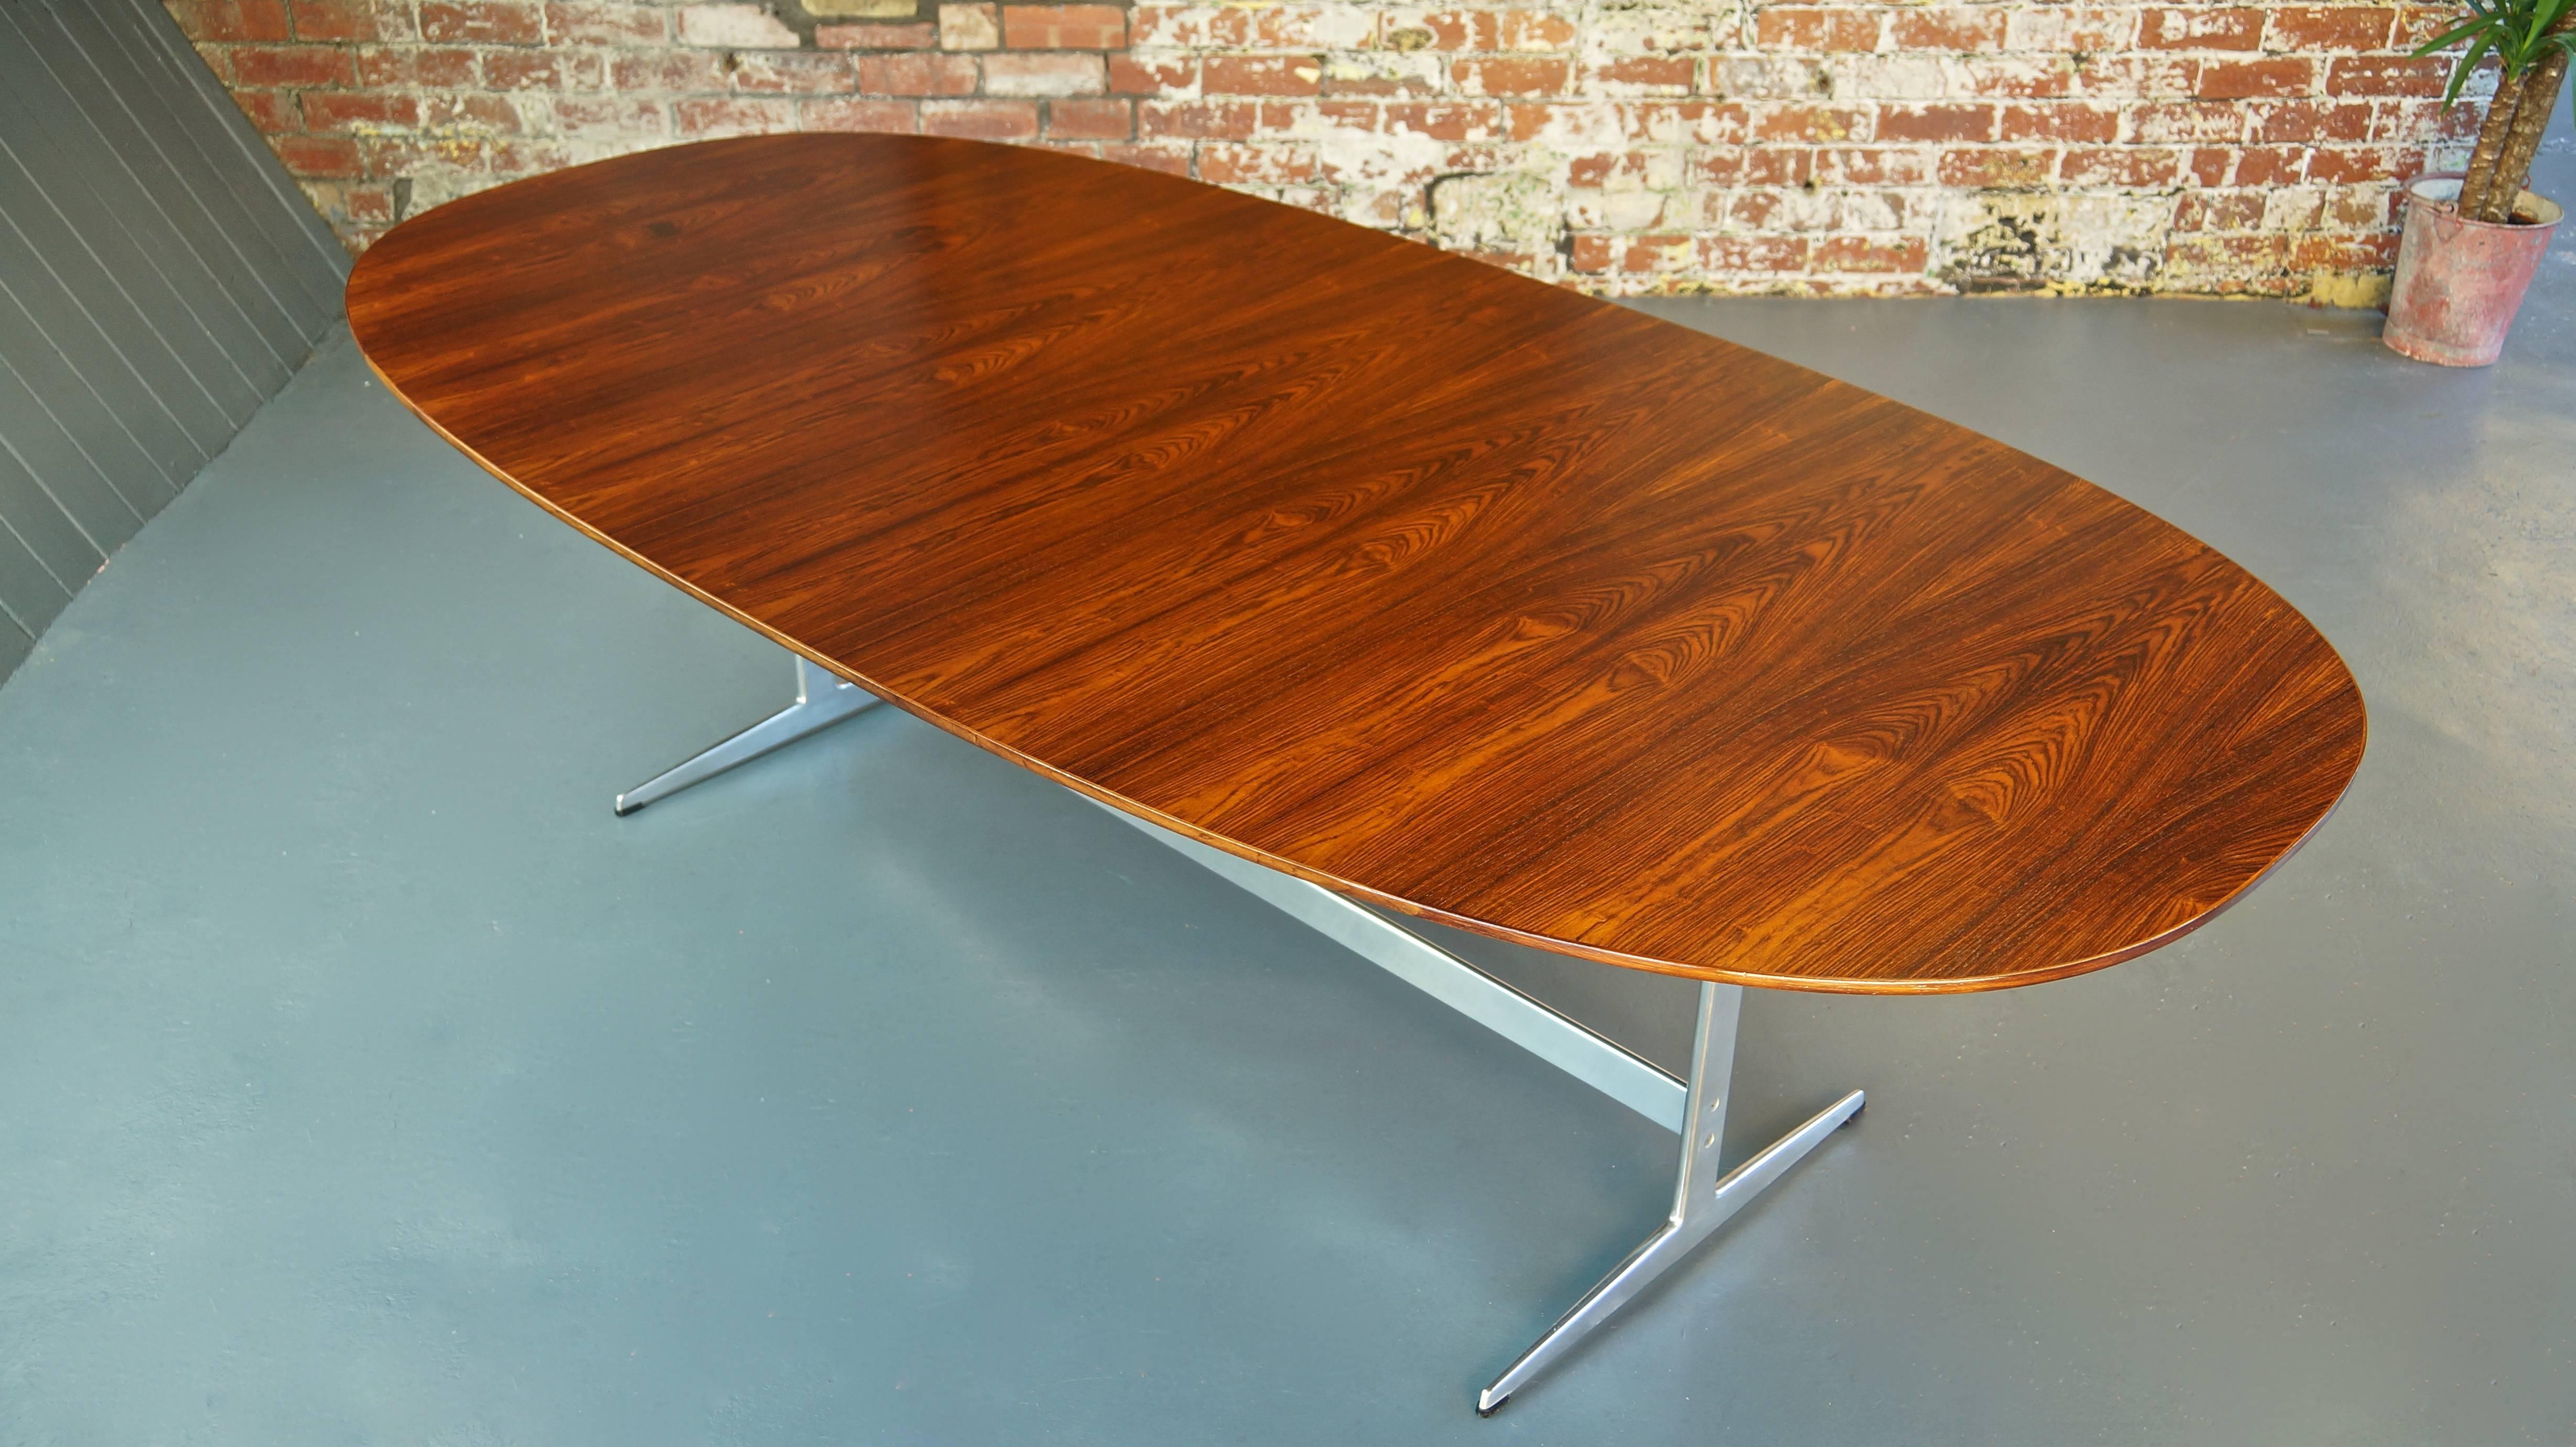 Large Fritz Hansen B614 super-elliptical rosewood table on rare solid aluminium shaker base

Designed in Denmark by: Arne Jacobsen, Bruno Mathsson and Piet Hein
Designed in 1968
Model: D614 (Shaker base variant)

Manufacture date of this